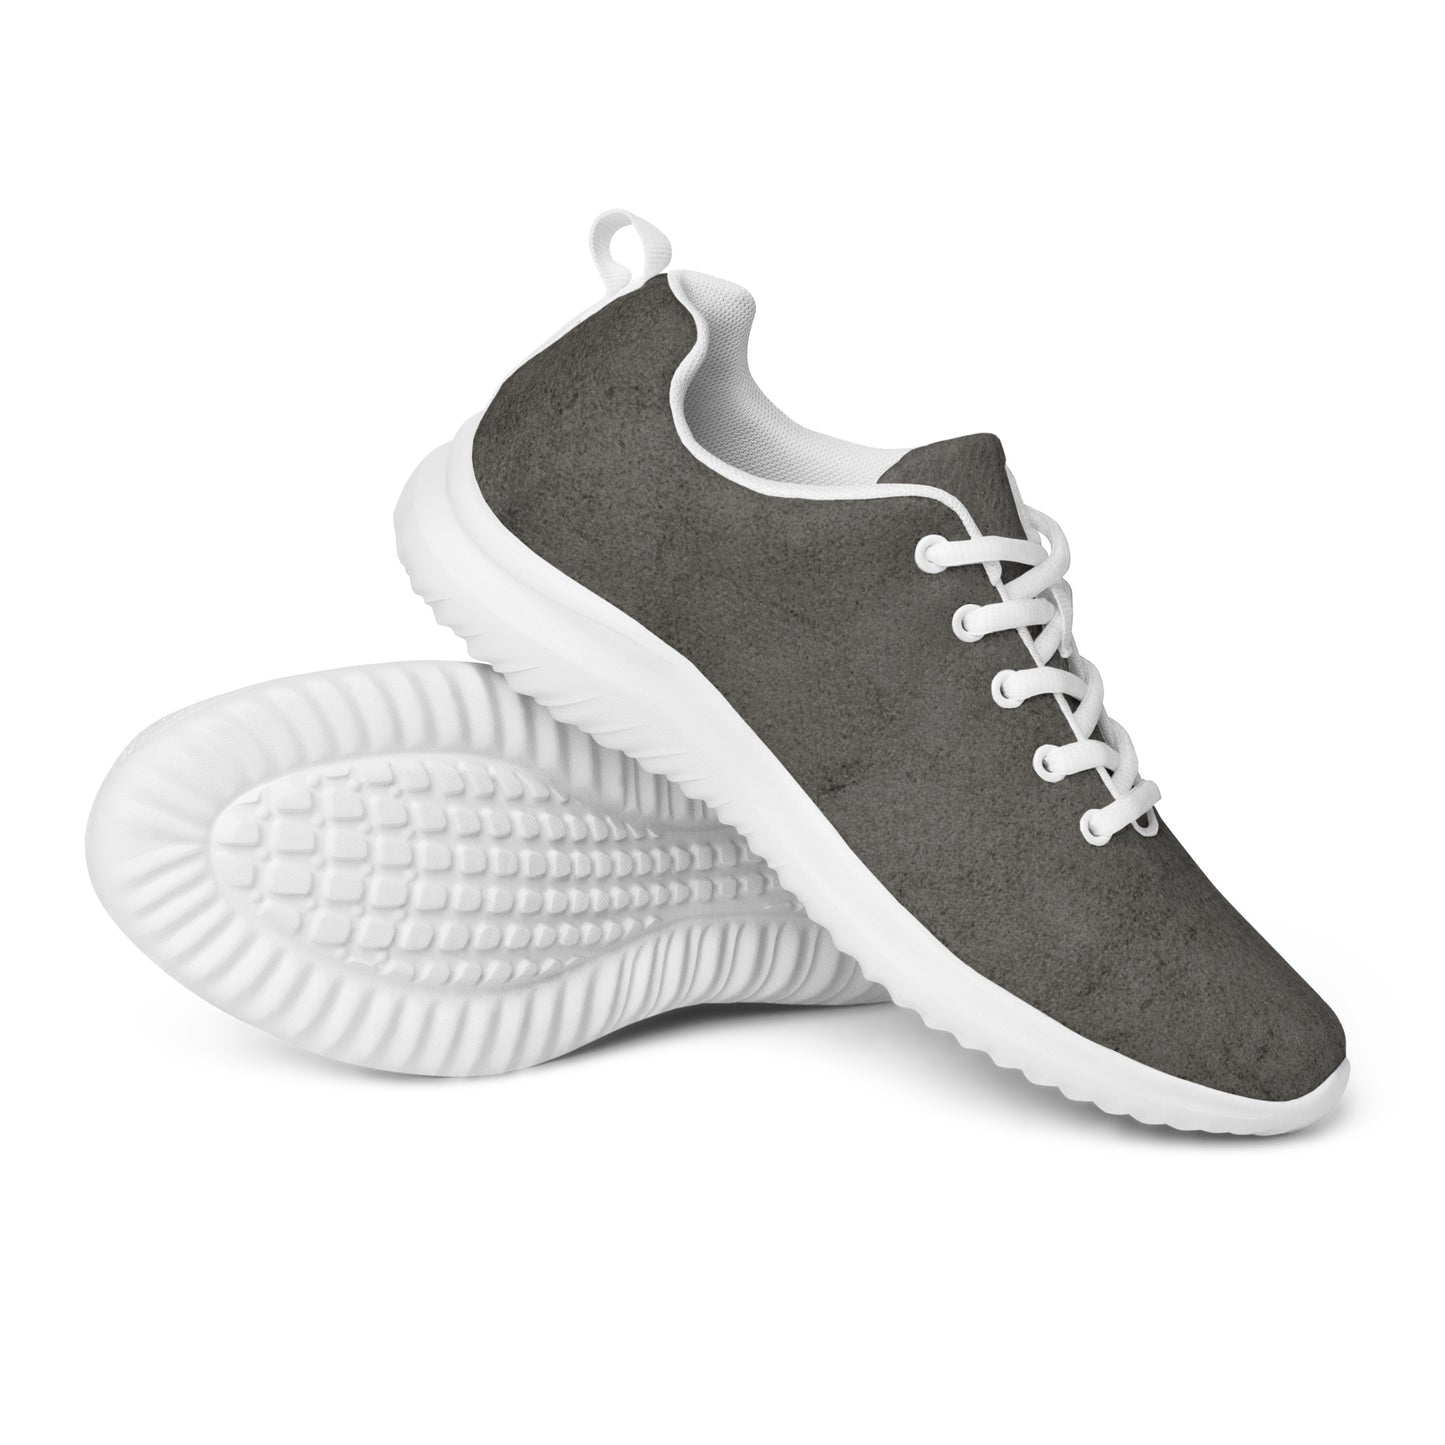 DASH Shade of Gray Women’s Athletic Shoes Lightweight Breathable Design by IOBI Original Apparel